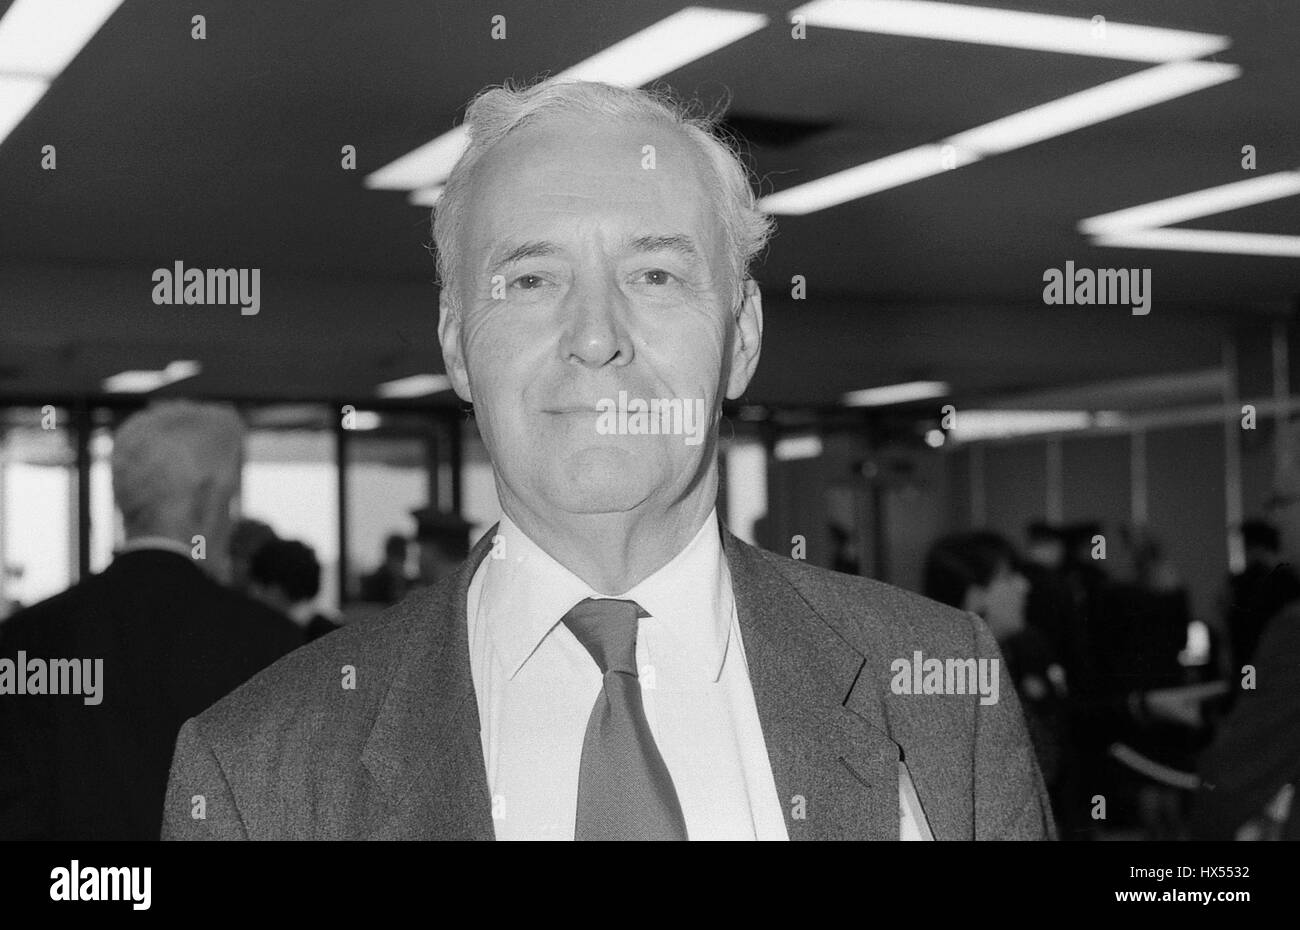 Rt. Hon. Tony Benn, Labour party Member of Parliament for Chesterfield, attends the party conference in Brighton, England on October 1, 1991. Stock Photo